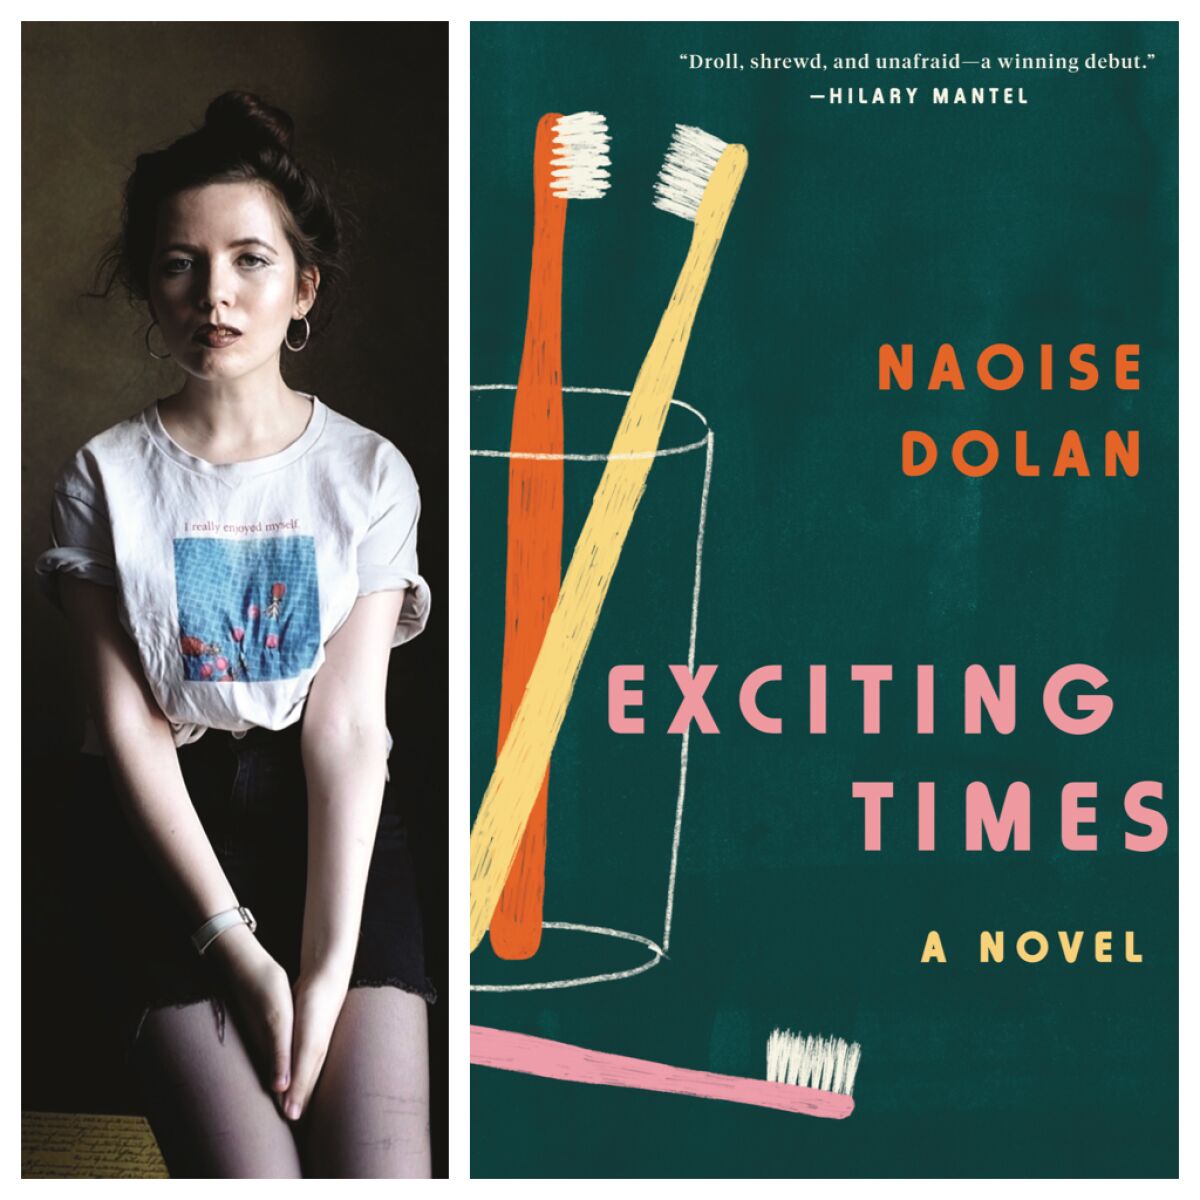 Naoise Dolan and her debut novel, "Exciting Times."